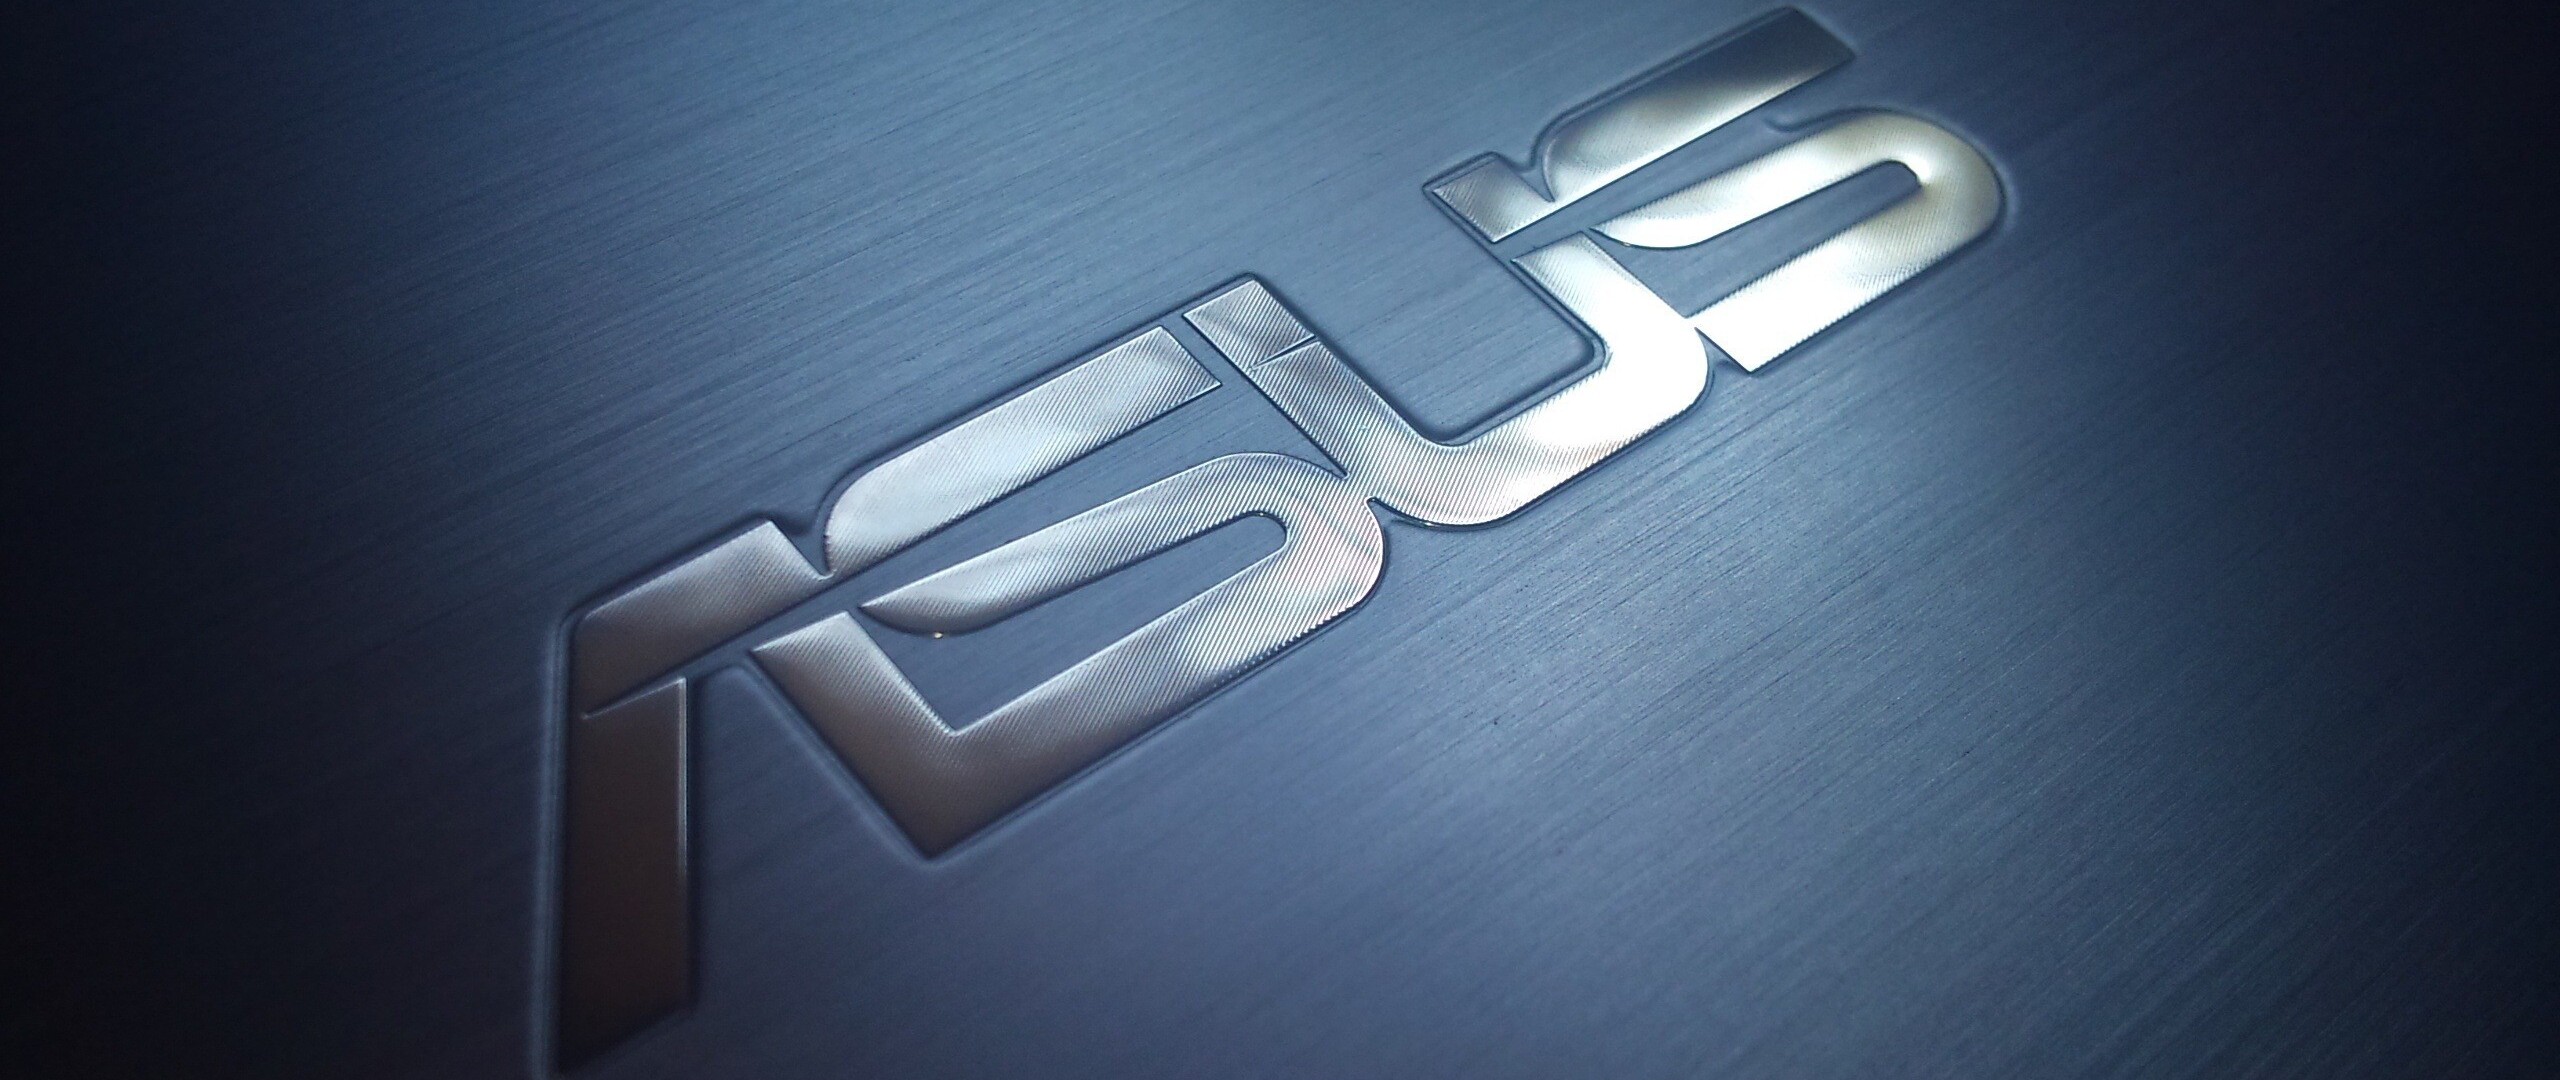 2560x1080 Asus 2560x1080 Resolution Hd 4k Wallpapers Images